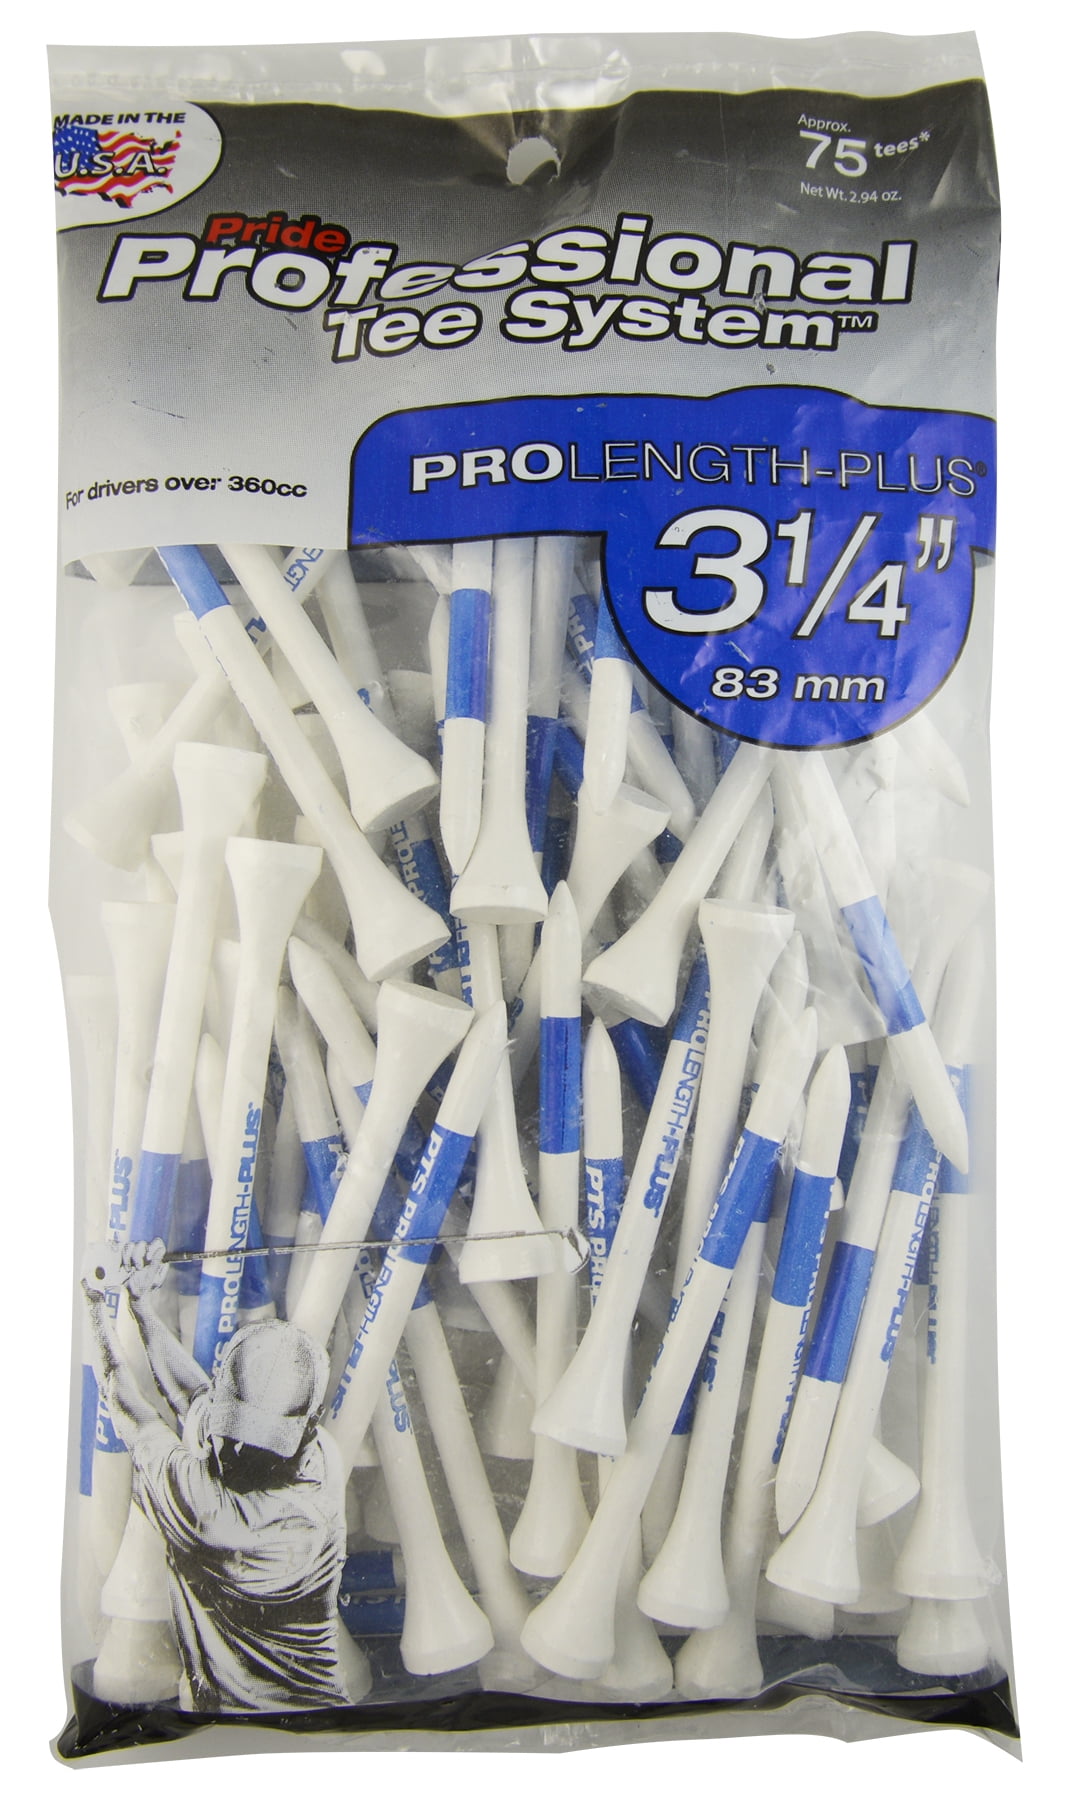 Pride Professional Tee System, 3-1/4" Blue on White ProLength Plus Tee, 75 Count